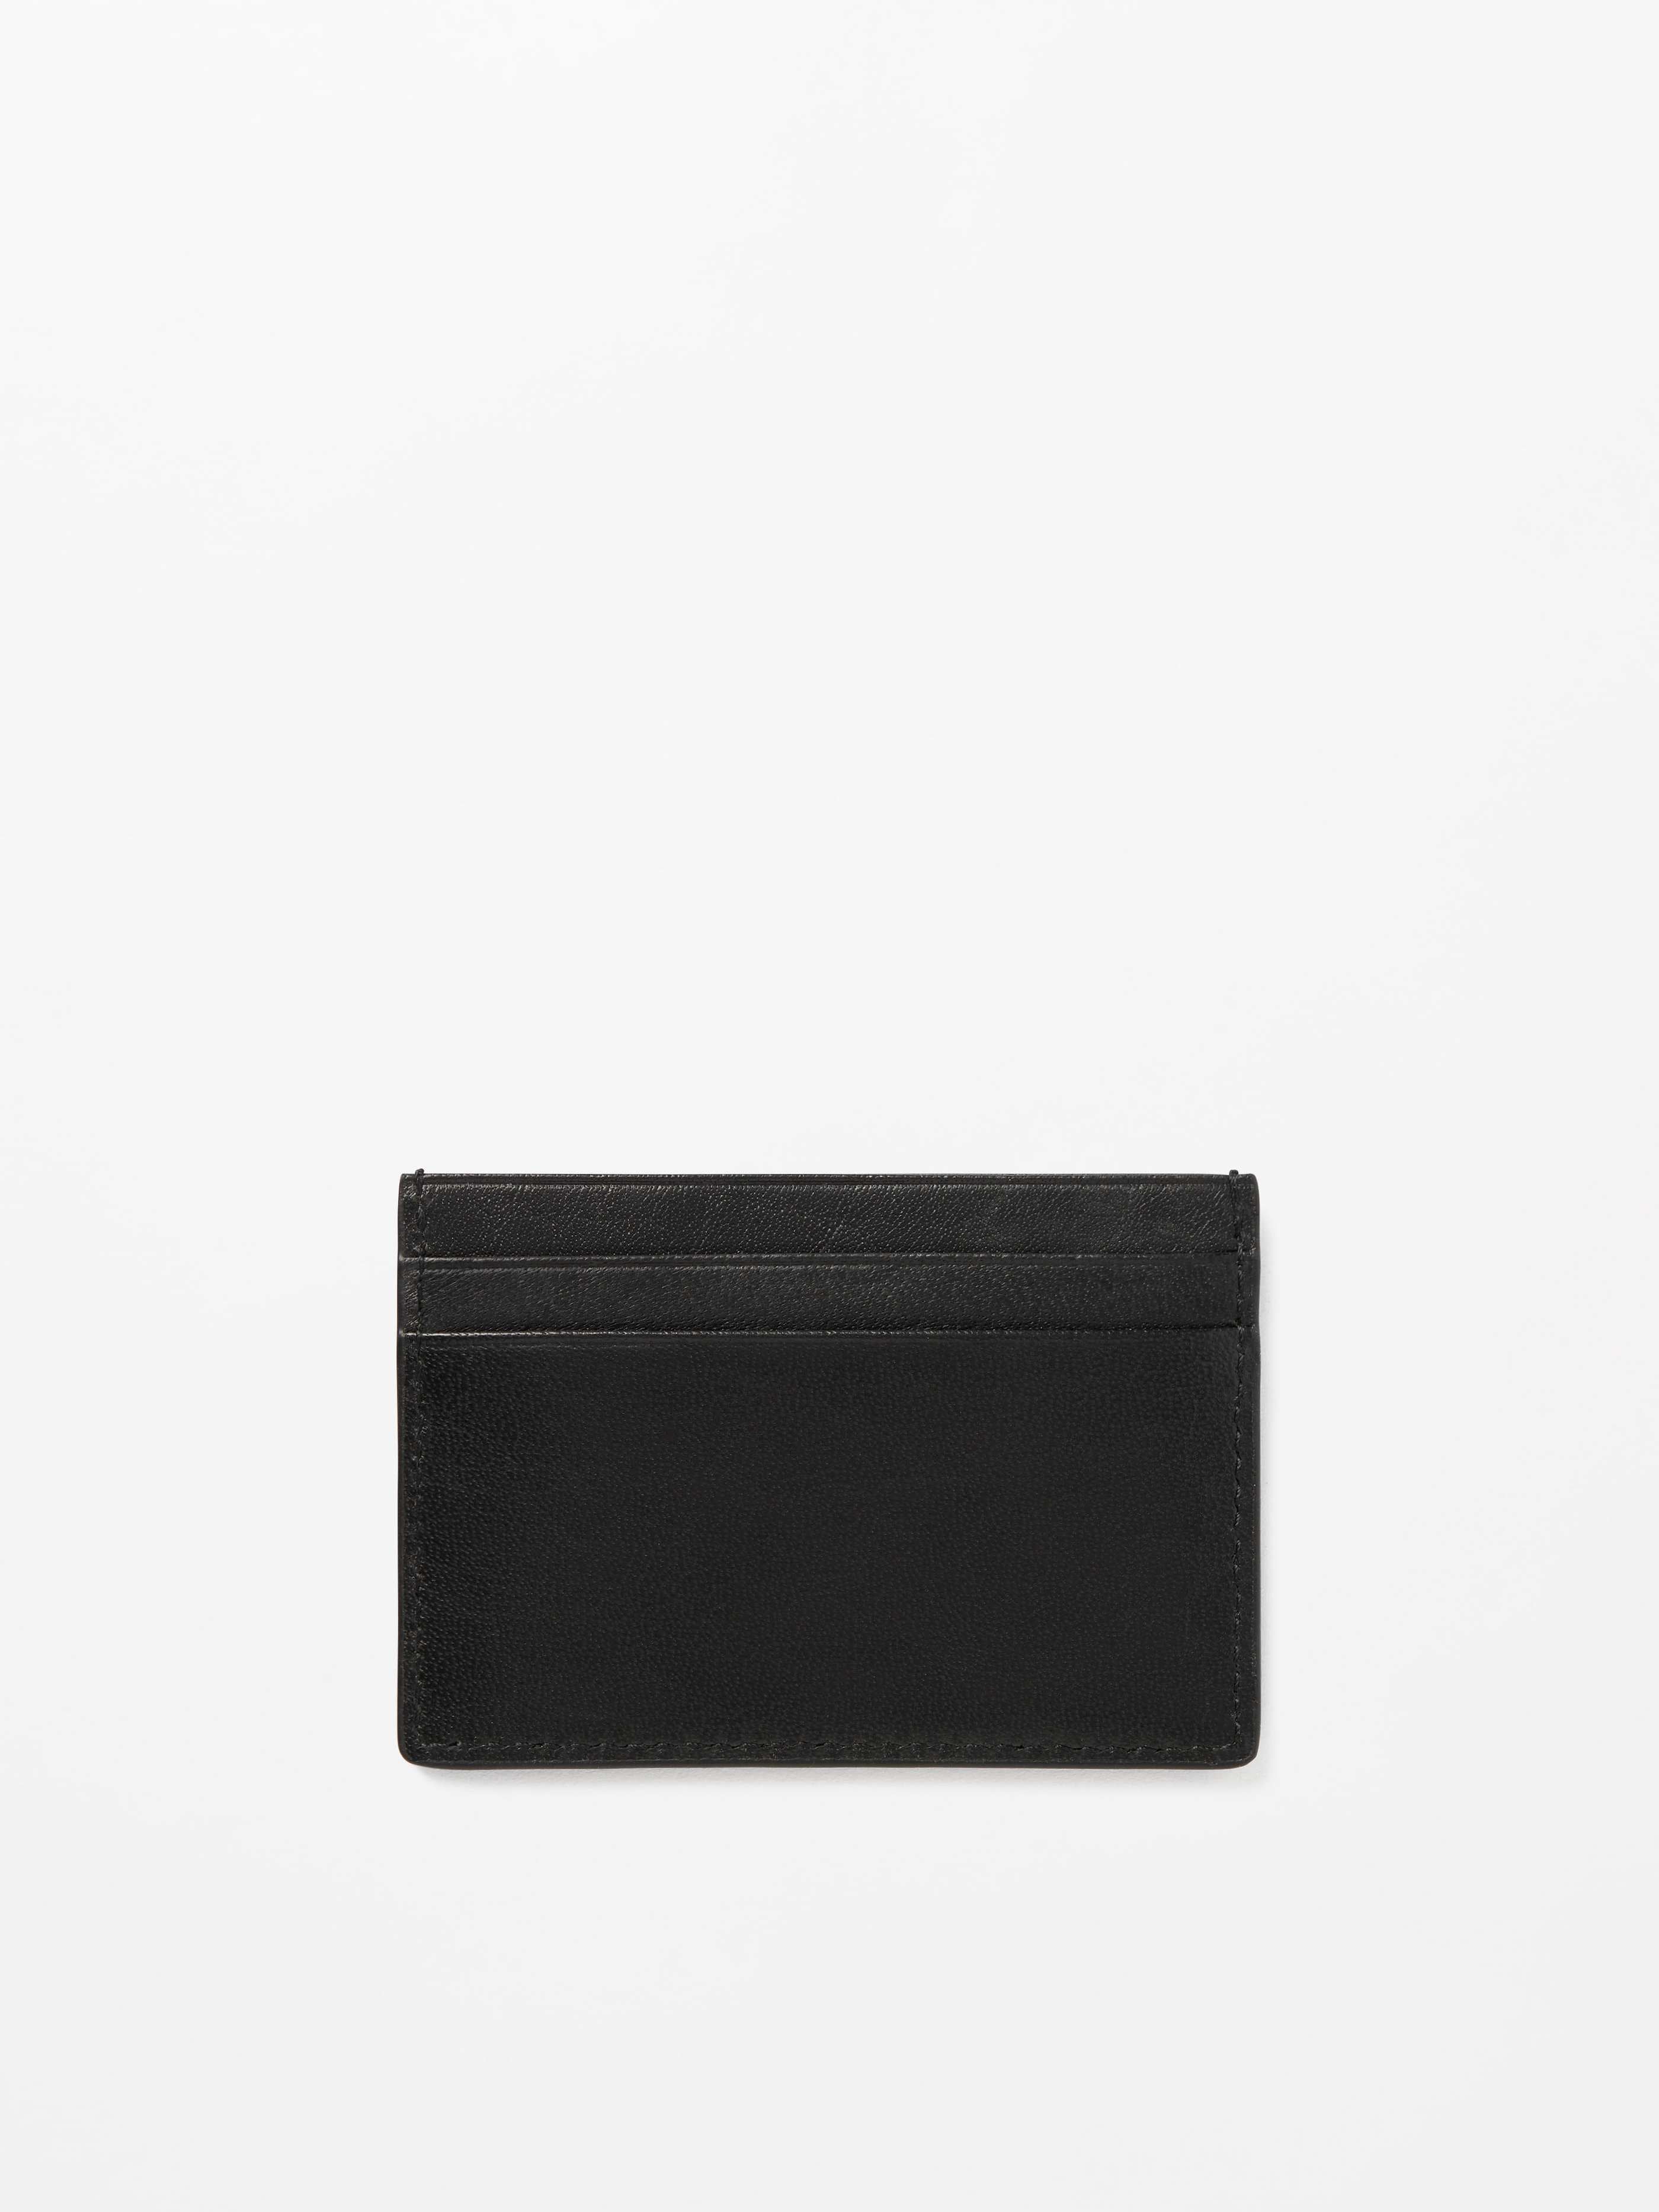 TIGER OF SWEDEN WAKE CARDHOLDER IN BLACK U69380009Z 050 | Shop from eightywingold an official brand partner for TIGER OF SWEDEN CANADA &amp; US